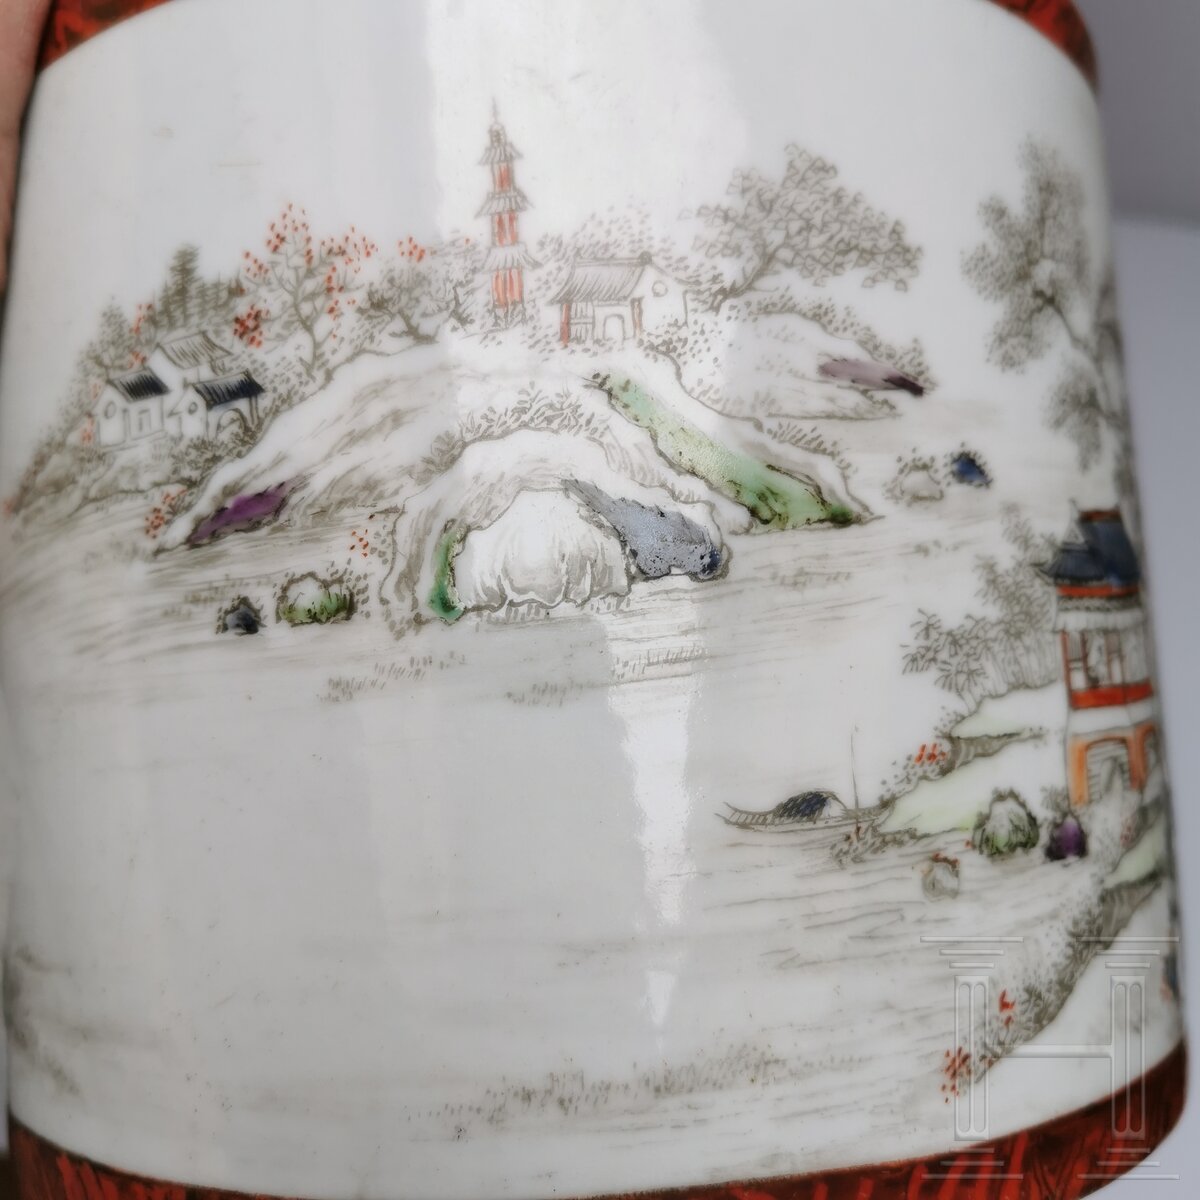 Großer Famille-rose-Pinseltopf in Holzoptik, China, wohl spätes 19./Anfang 20. Jhdt. - Image 11 of 17